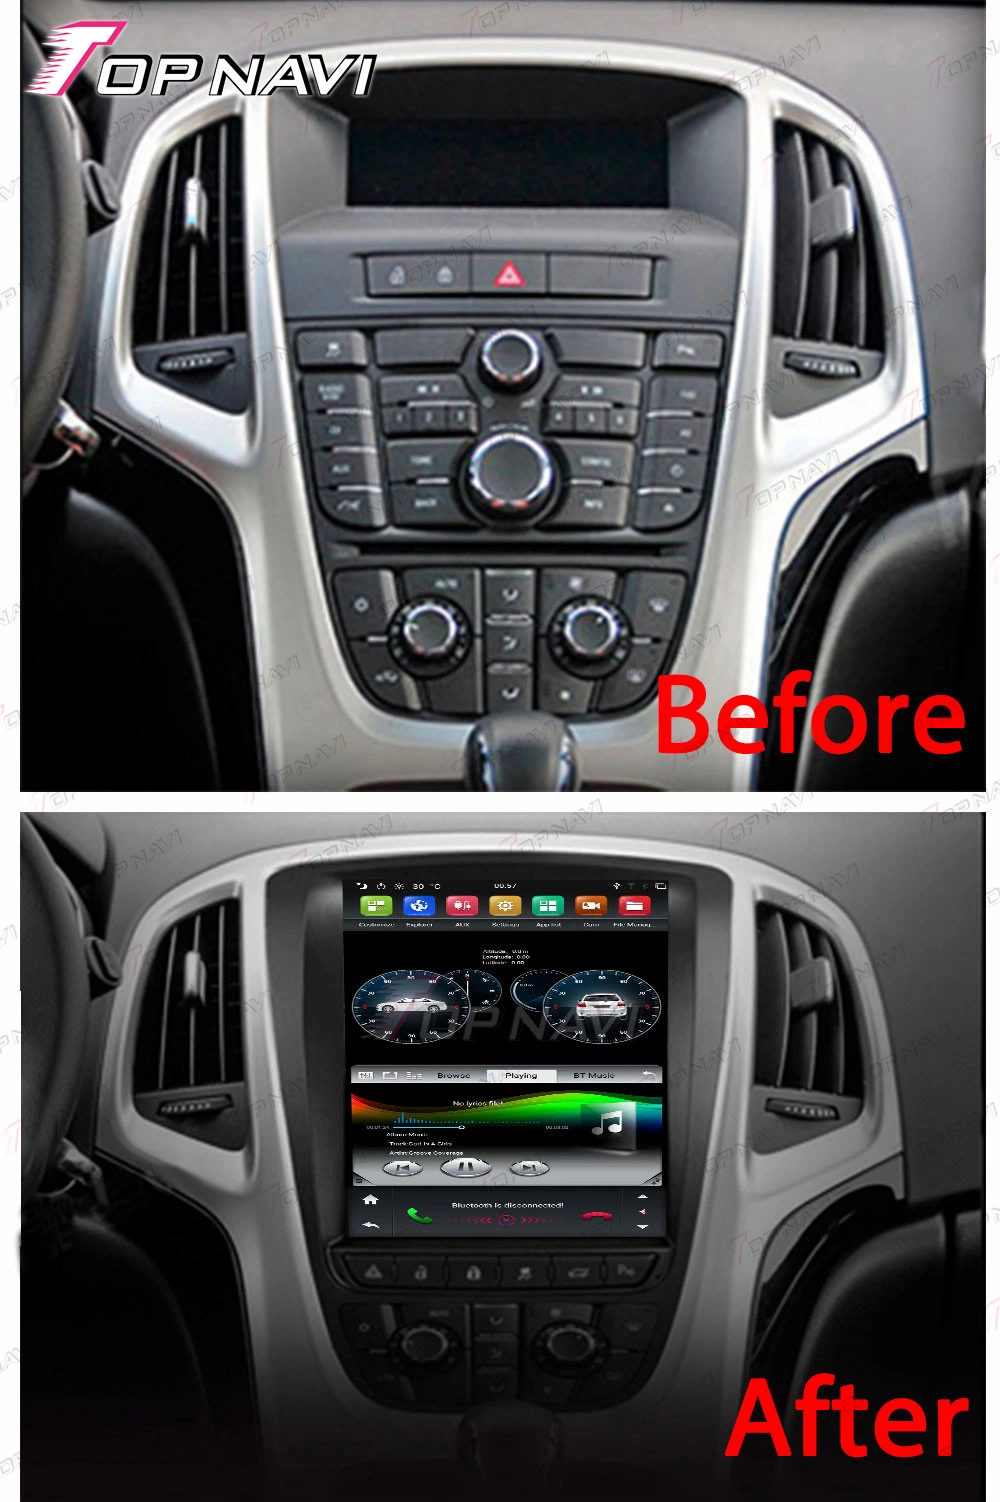 9.7 Inch Car Stereo Android for Opel Astra J 2012 2013 2014 Car Entertainment System Car DVD Player